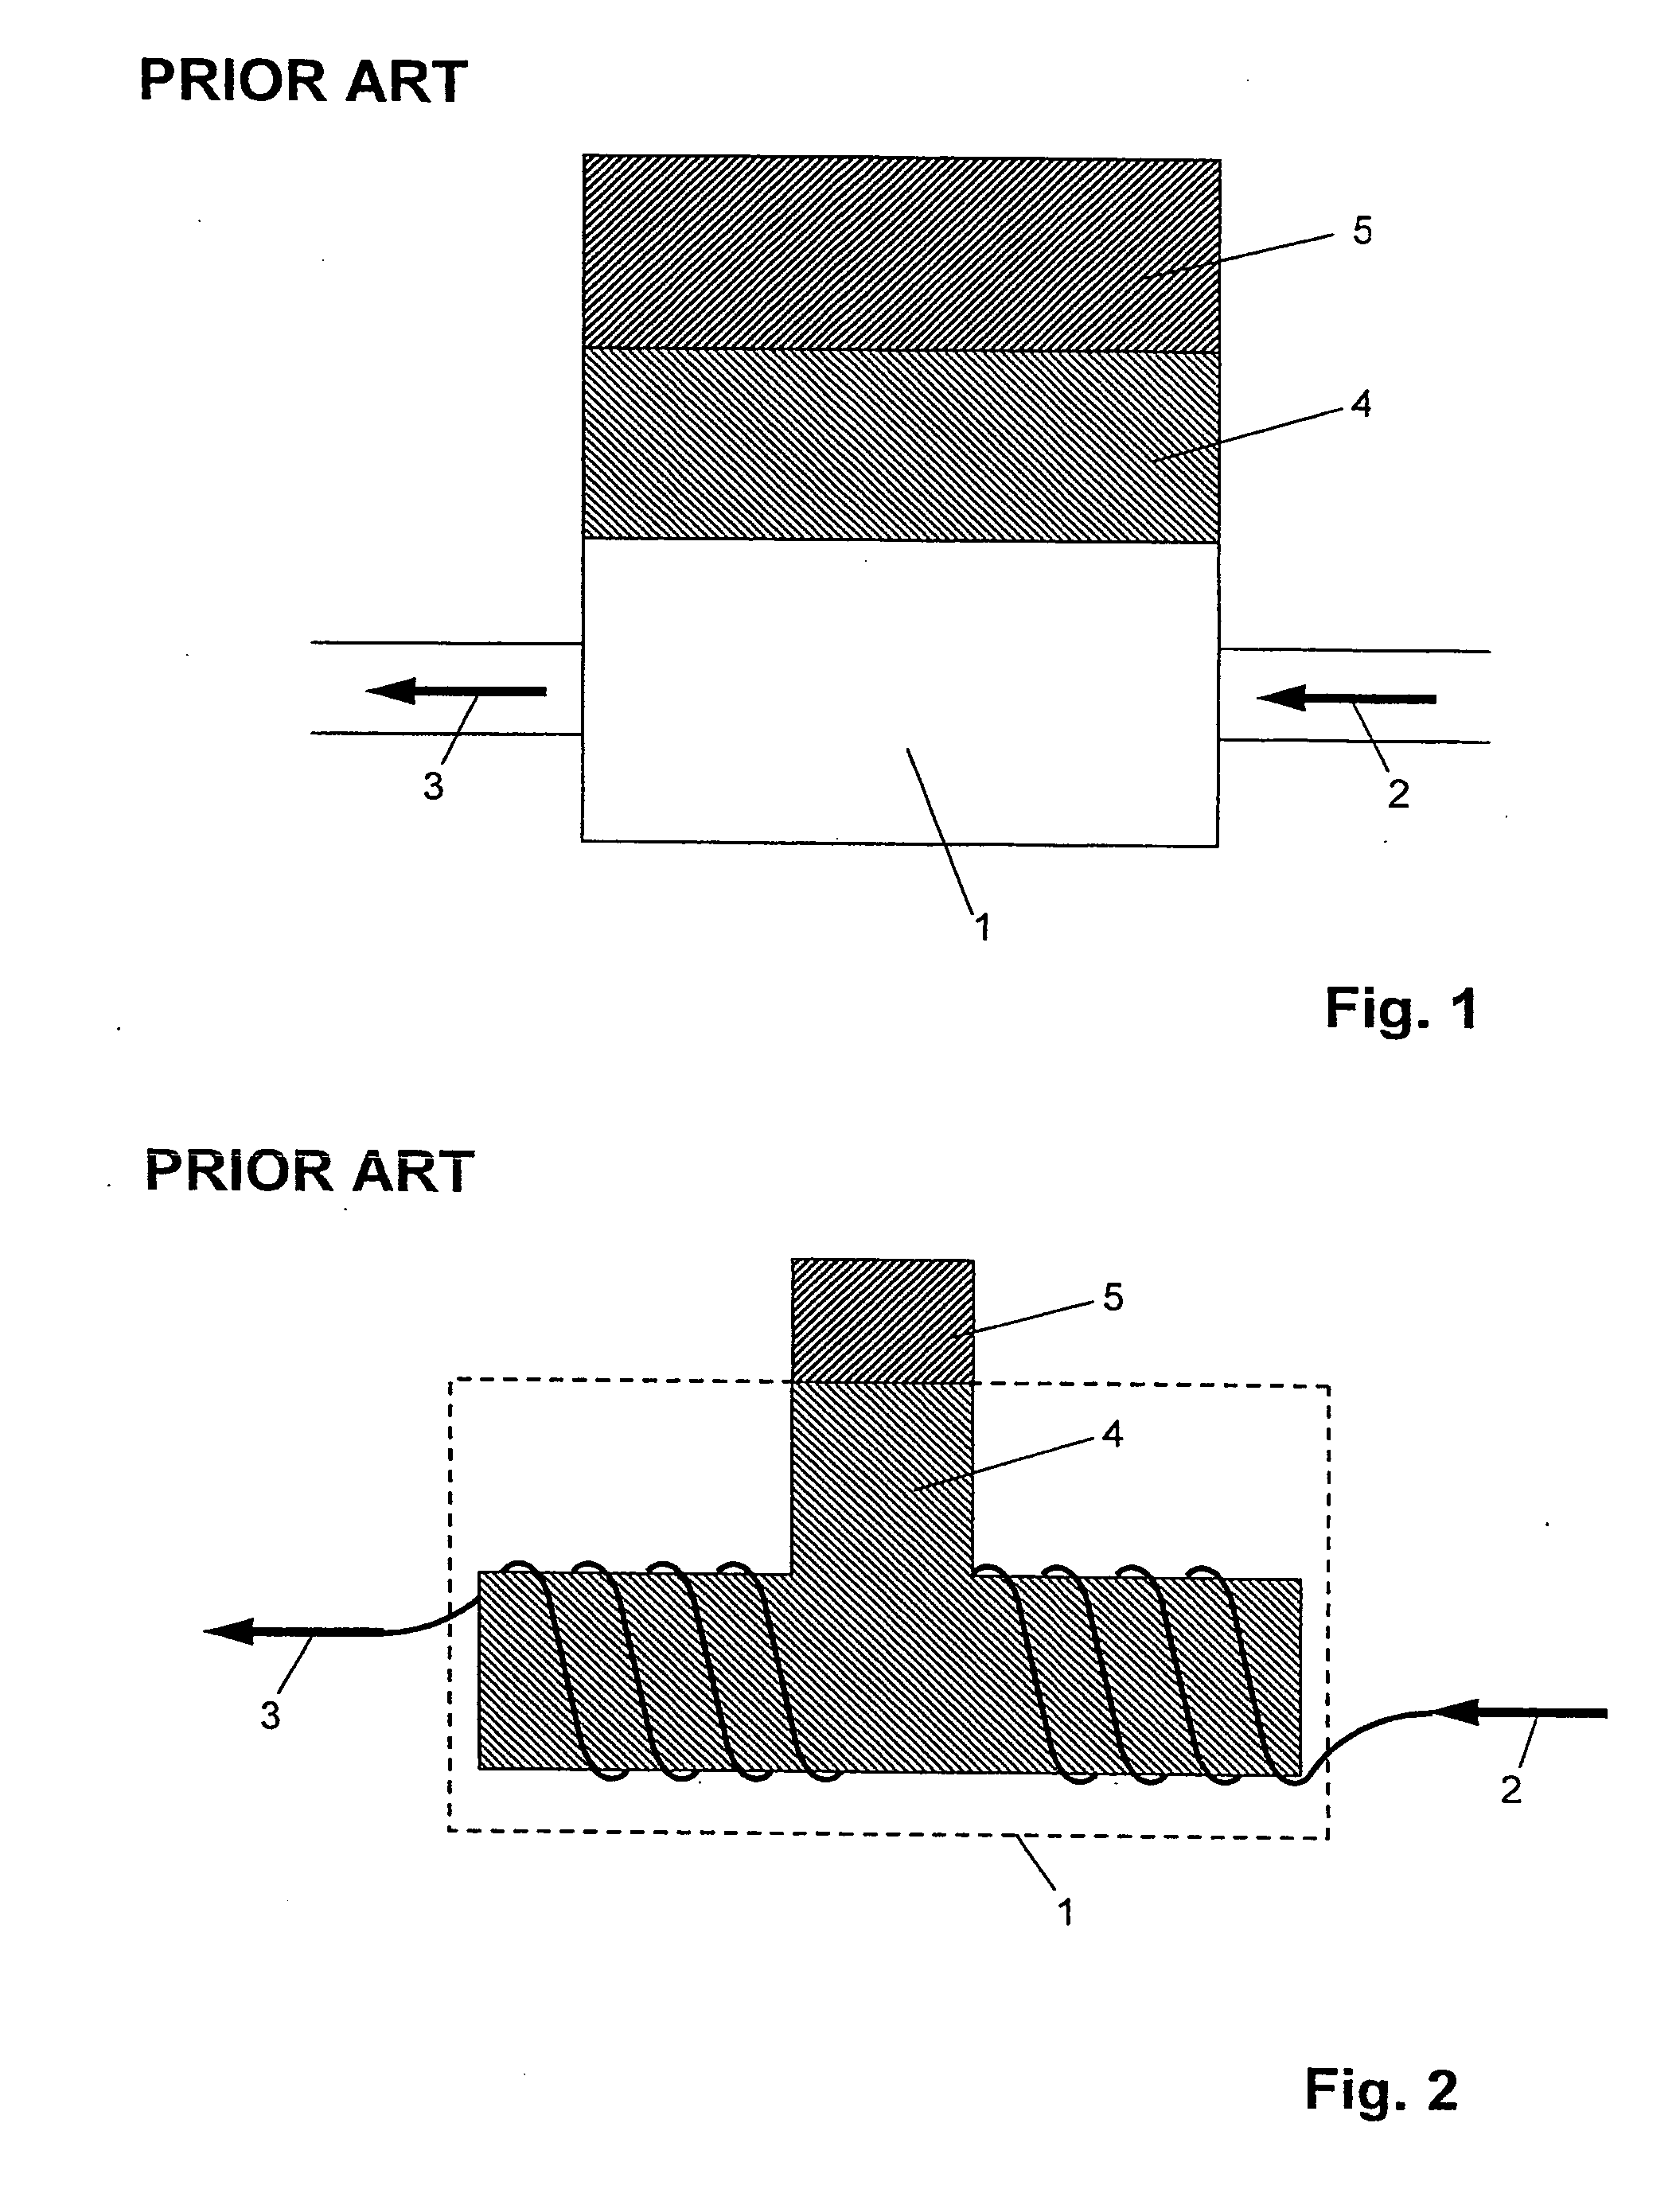 Cooling device for cryogenic cooling of an NMR detection system with the assistance of a container filled with a cryogenic fluid